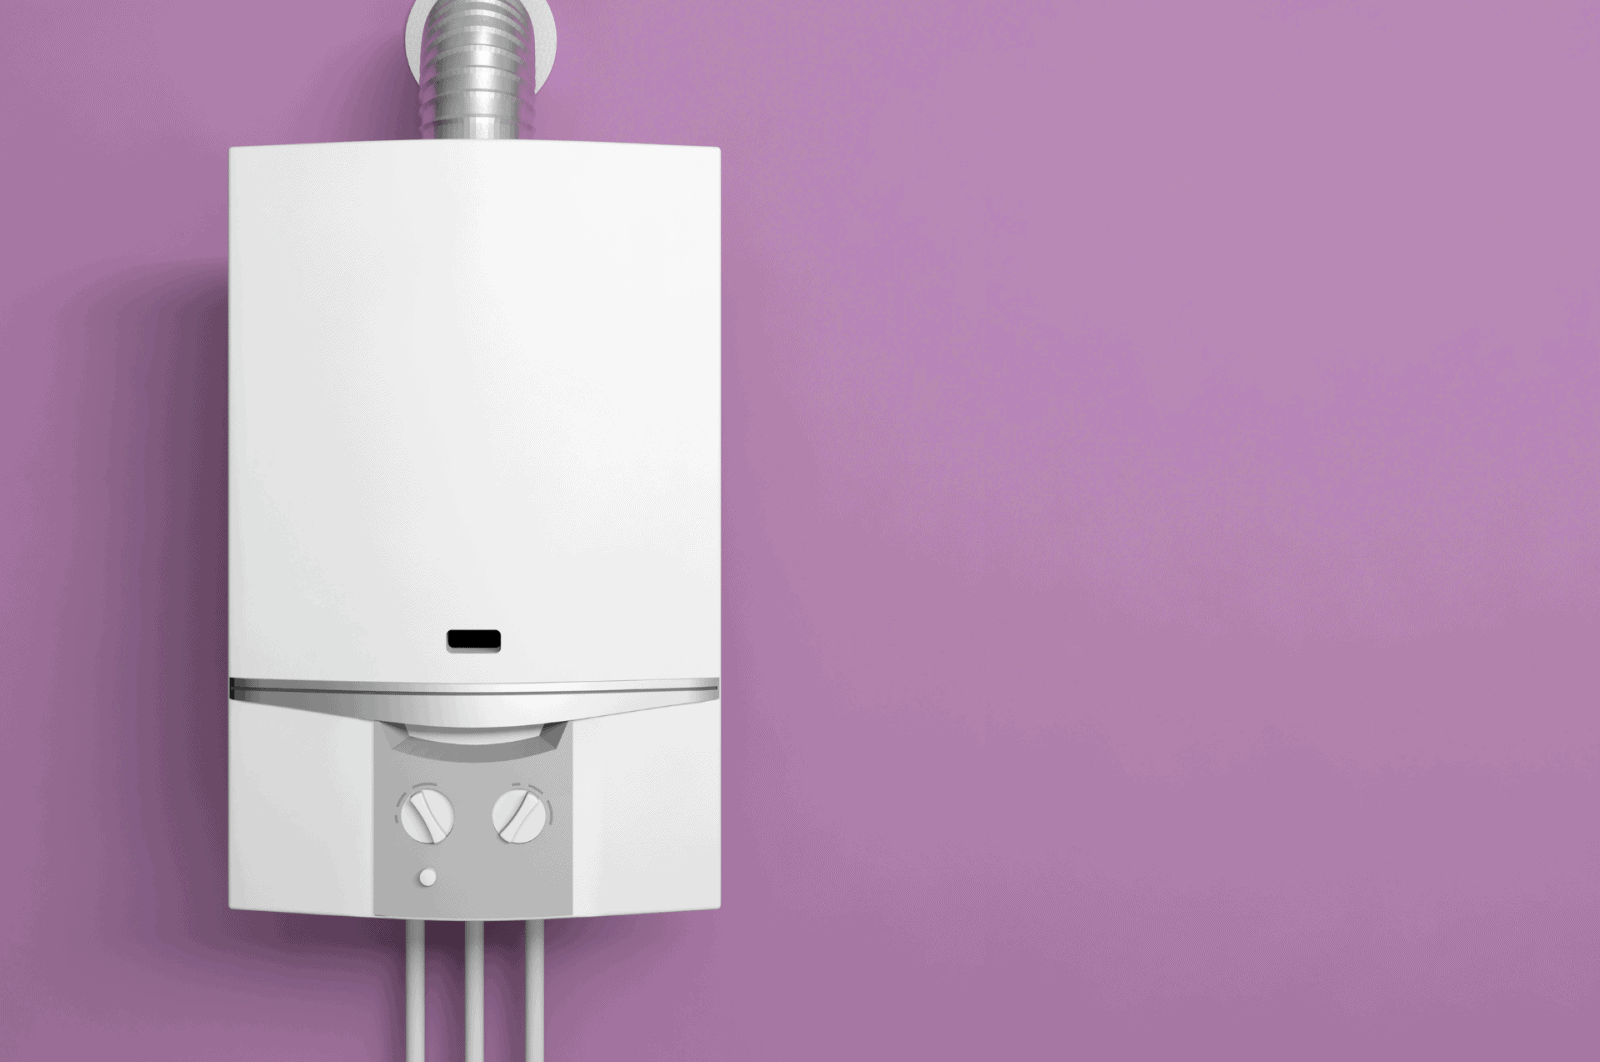 A white water heater on a purple wall